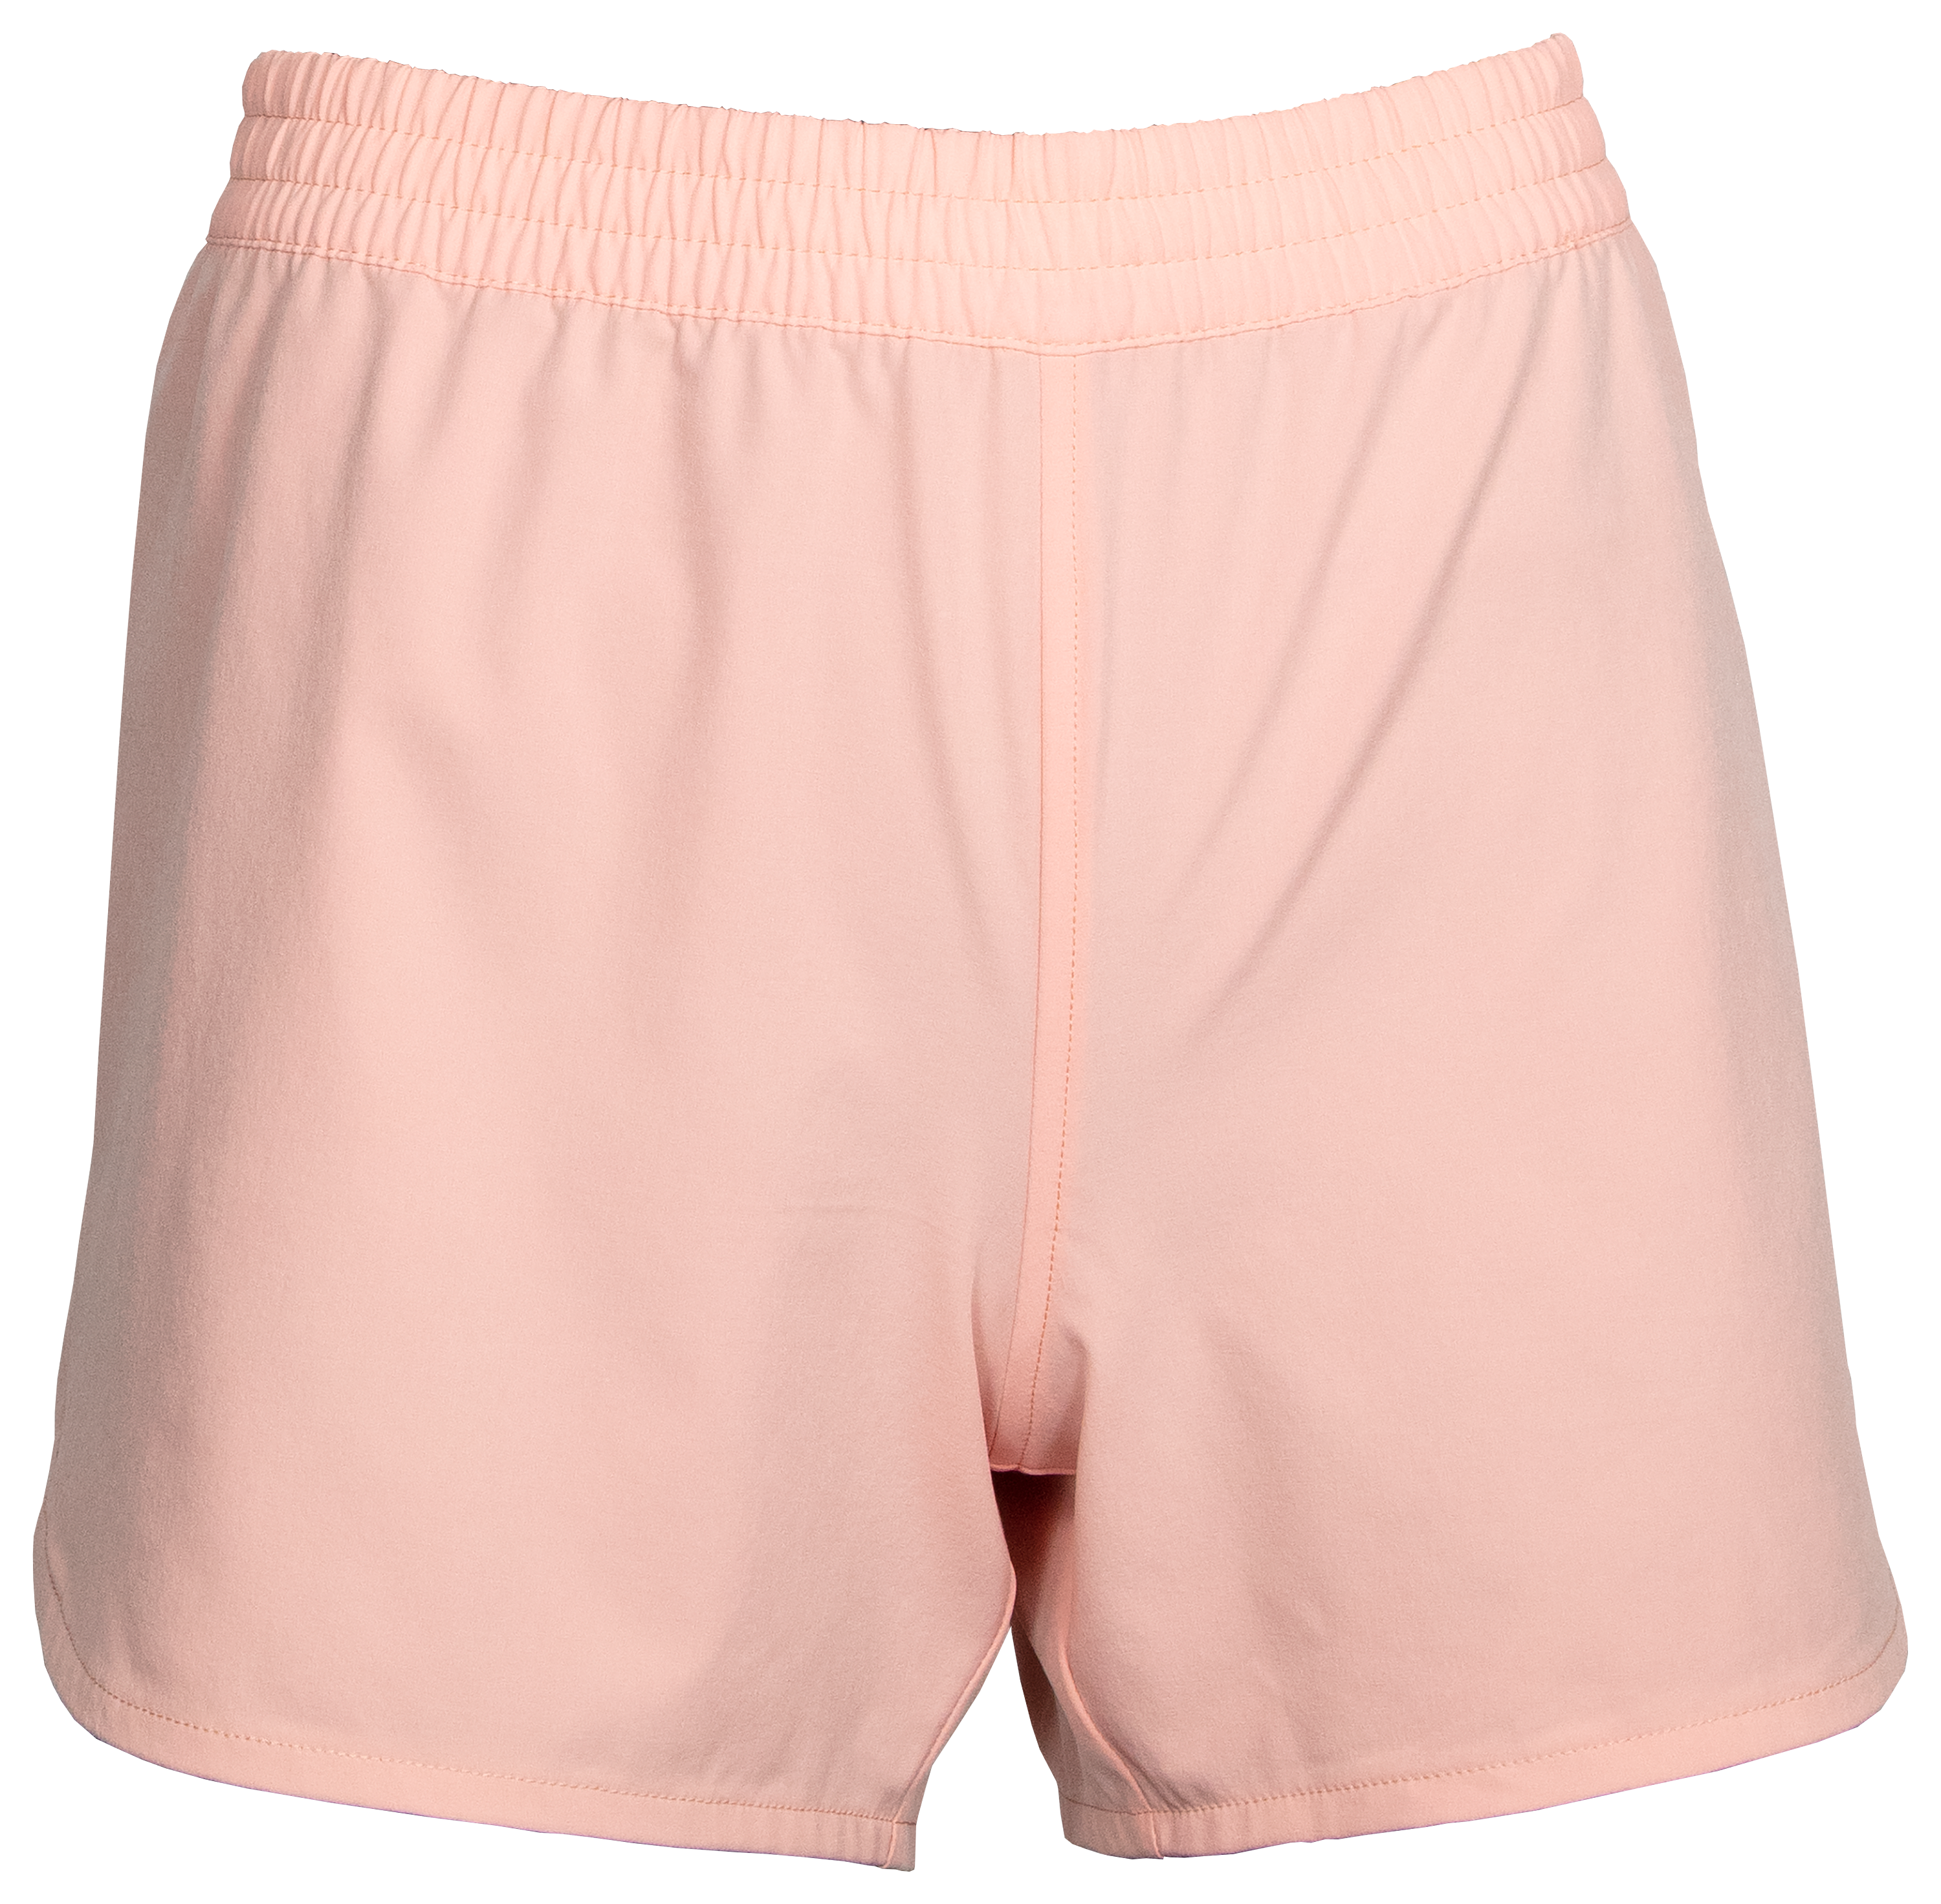 World Wide Sportsman Charter Print Pull-On Shorts for Ladies - Candlelight Peach - XL